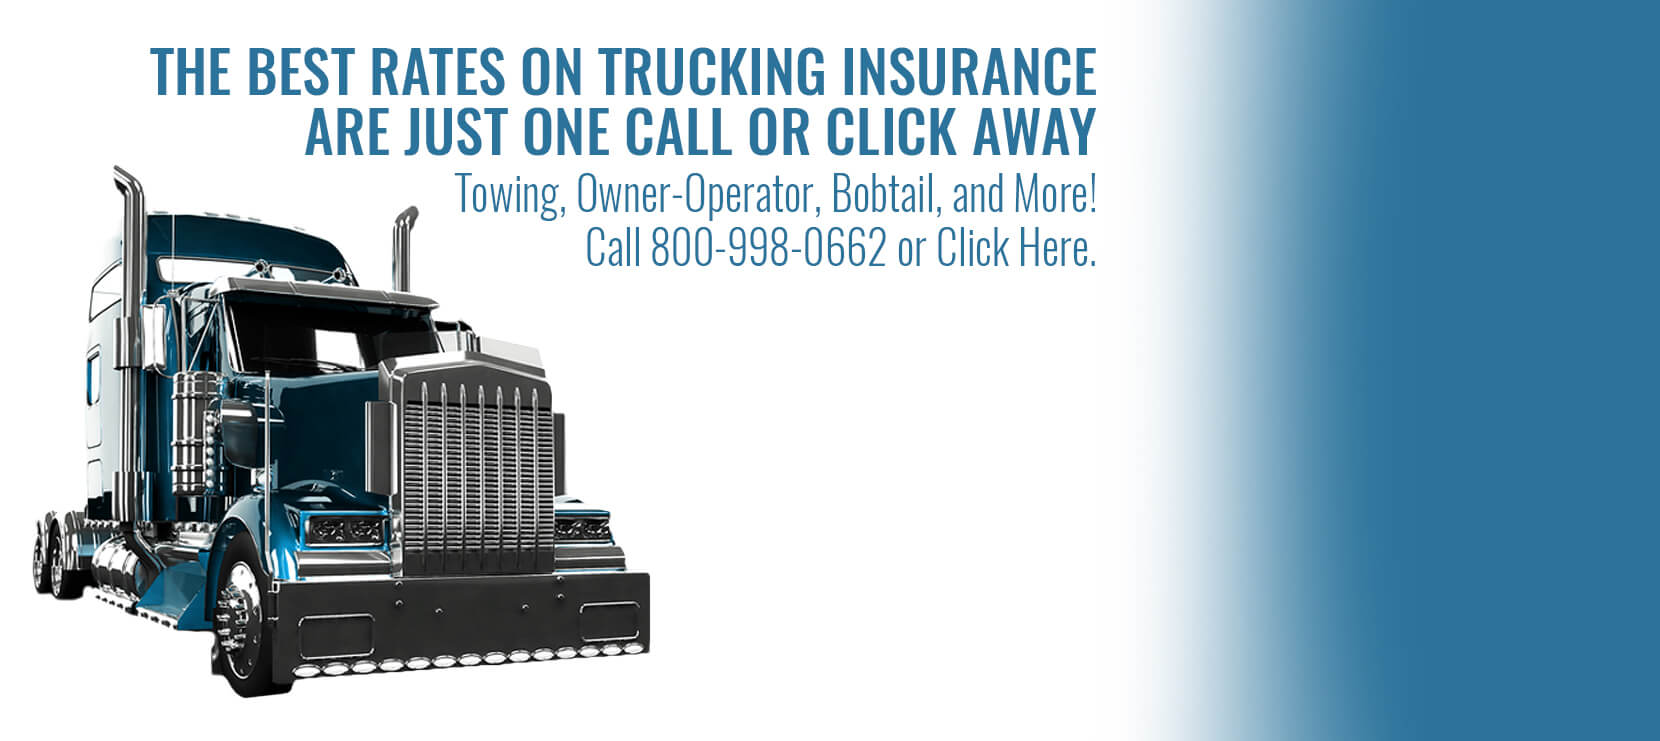 Commercial Truck Insurance Ohio